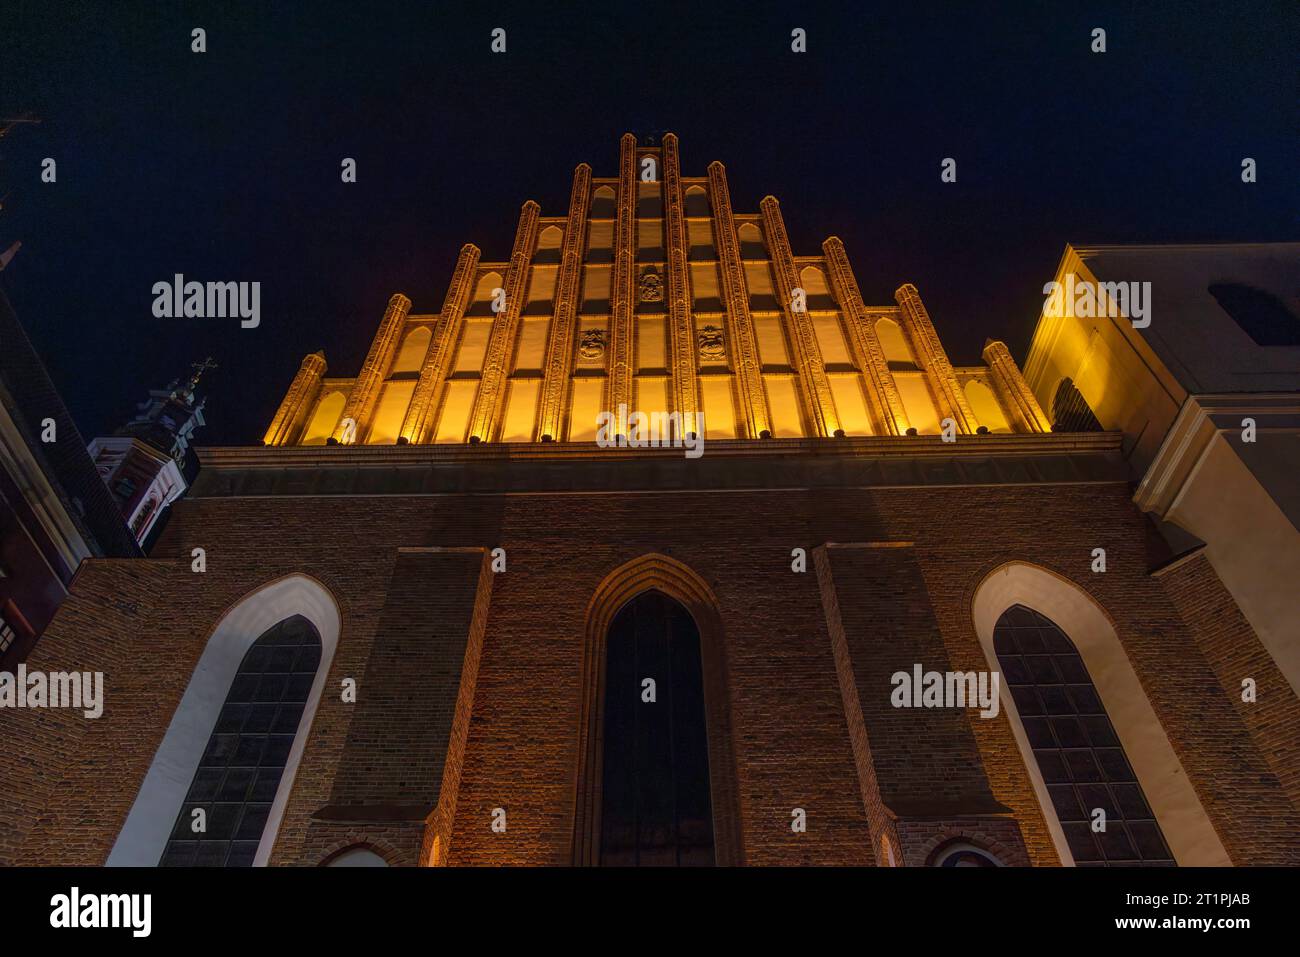 exterior facade of Archcathedral Basilica of St. John the Baptist at night, old town, Warsaw, Poland Stock Photo